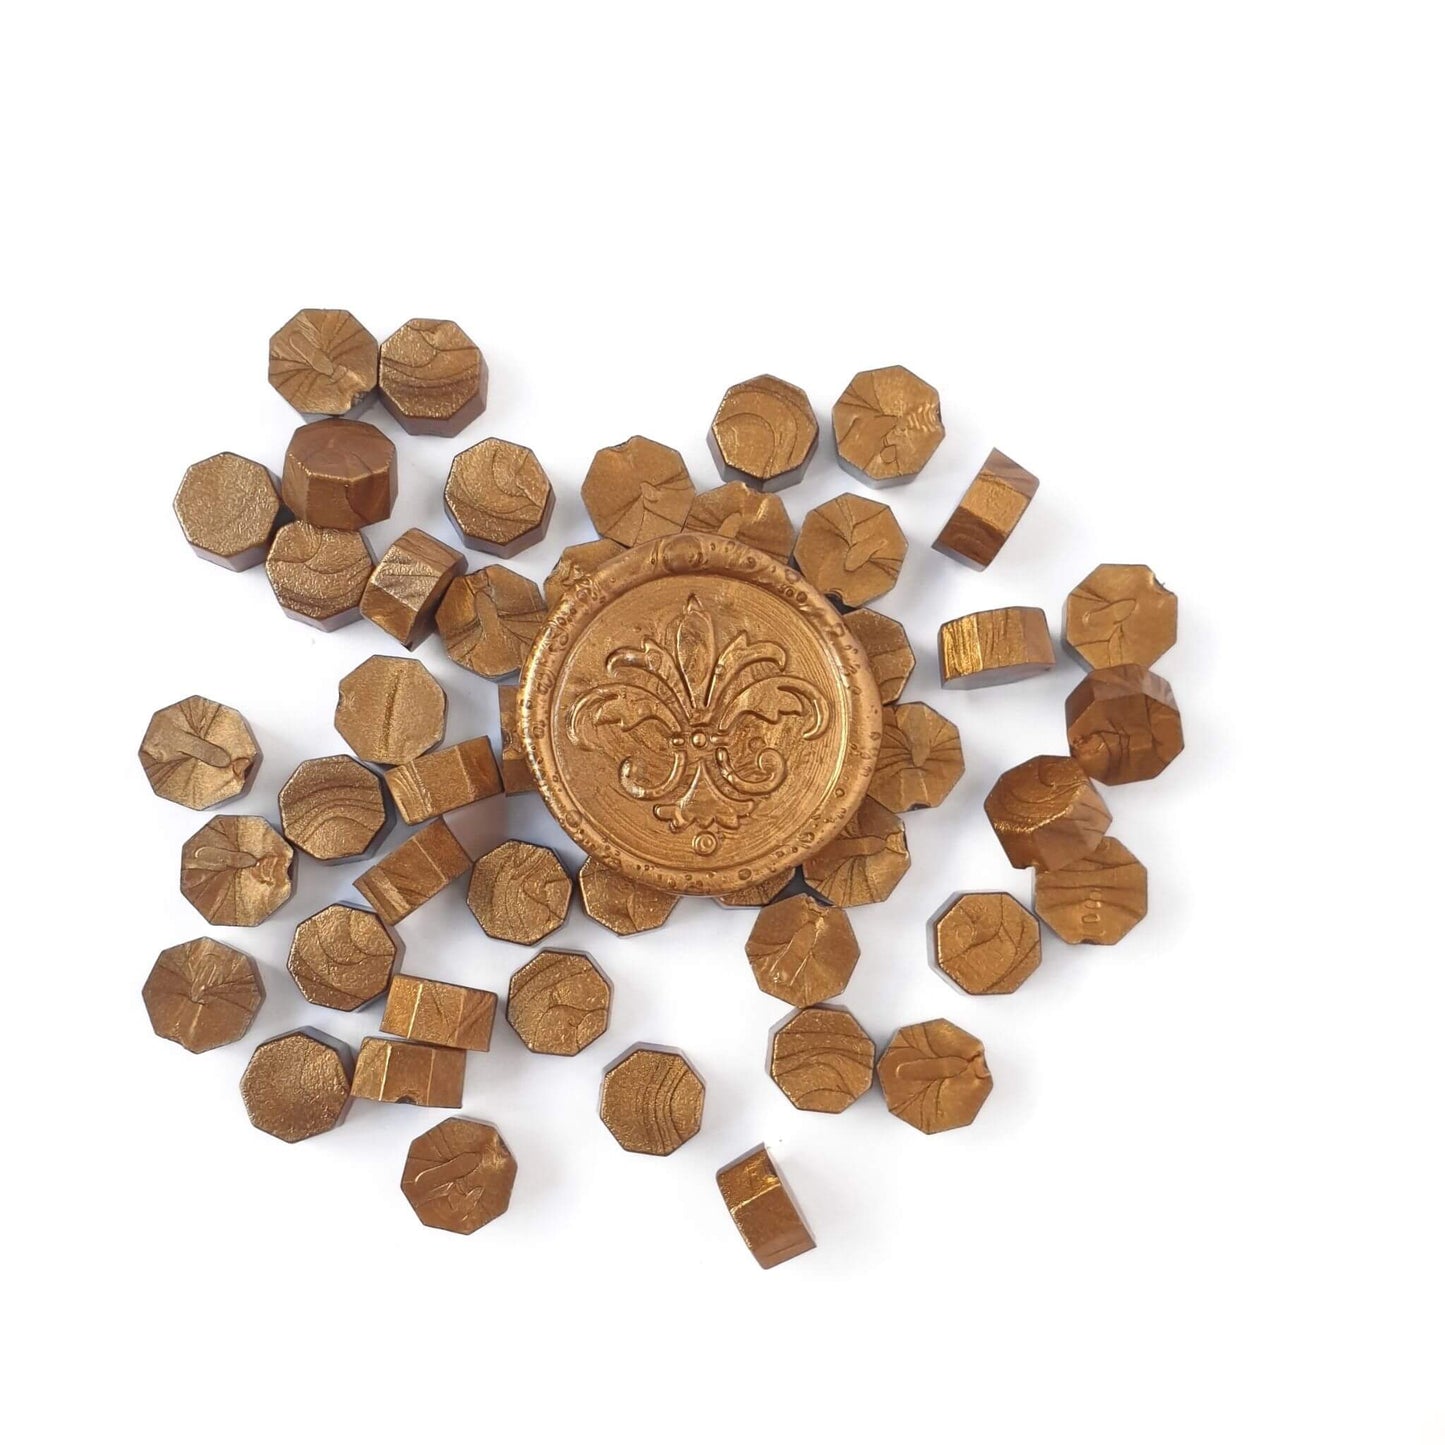 Antique Gold sealing wax beads and antique gold seal